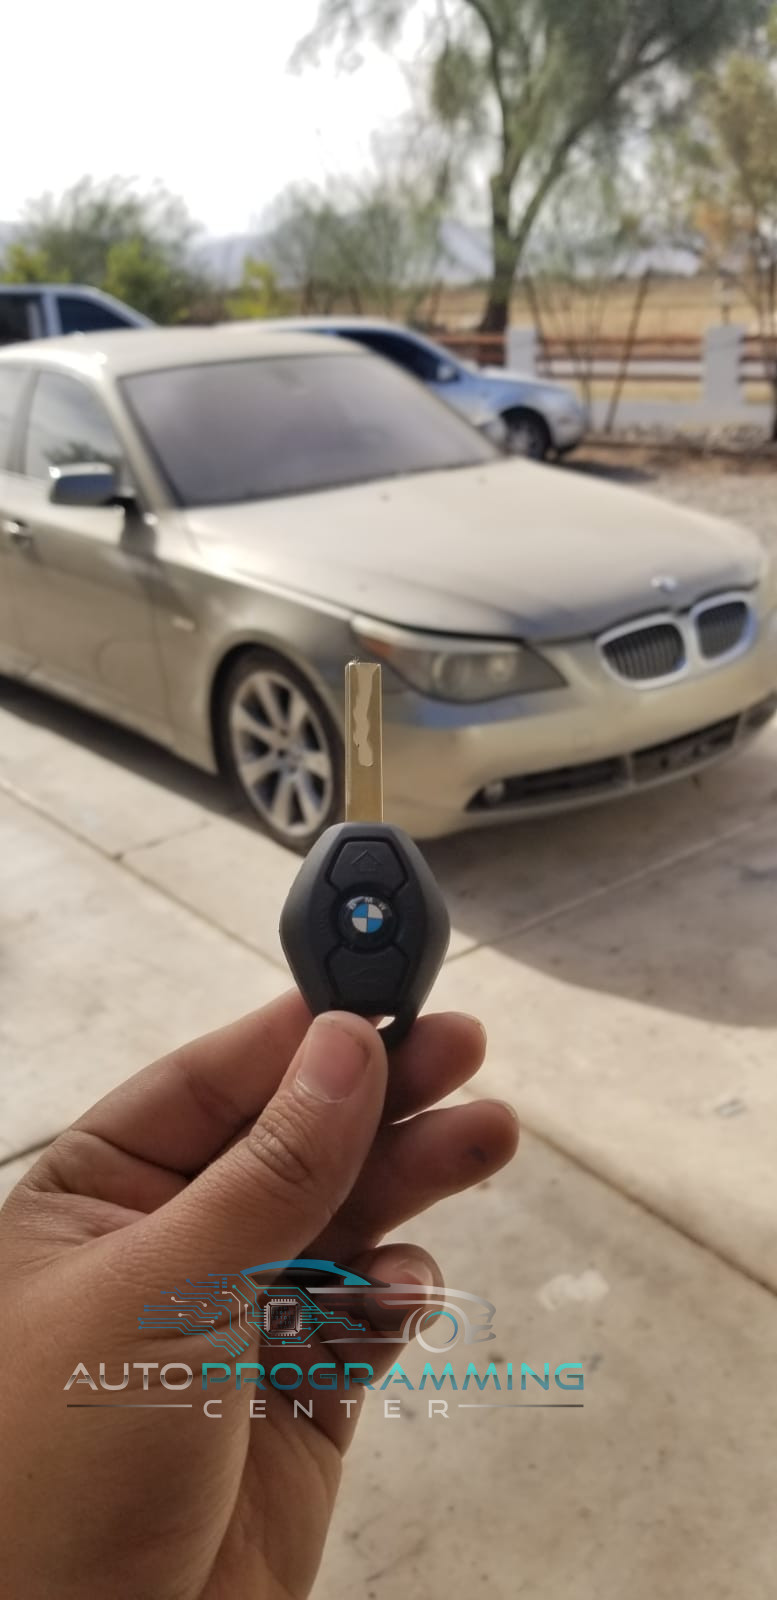 High-resolution image of a BMW key fob, showcasing its sleek design and advanced features for luxury vehicle access and control.